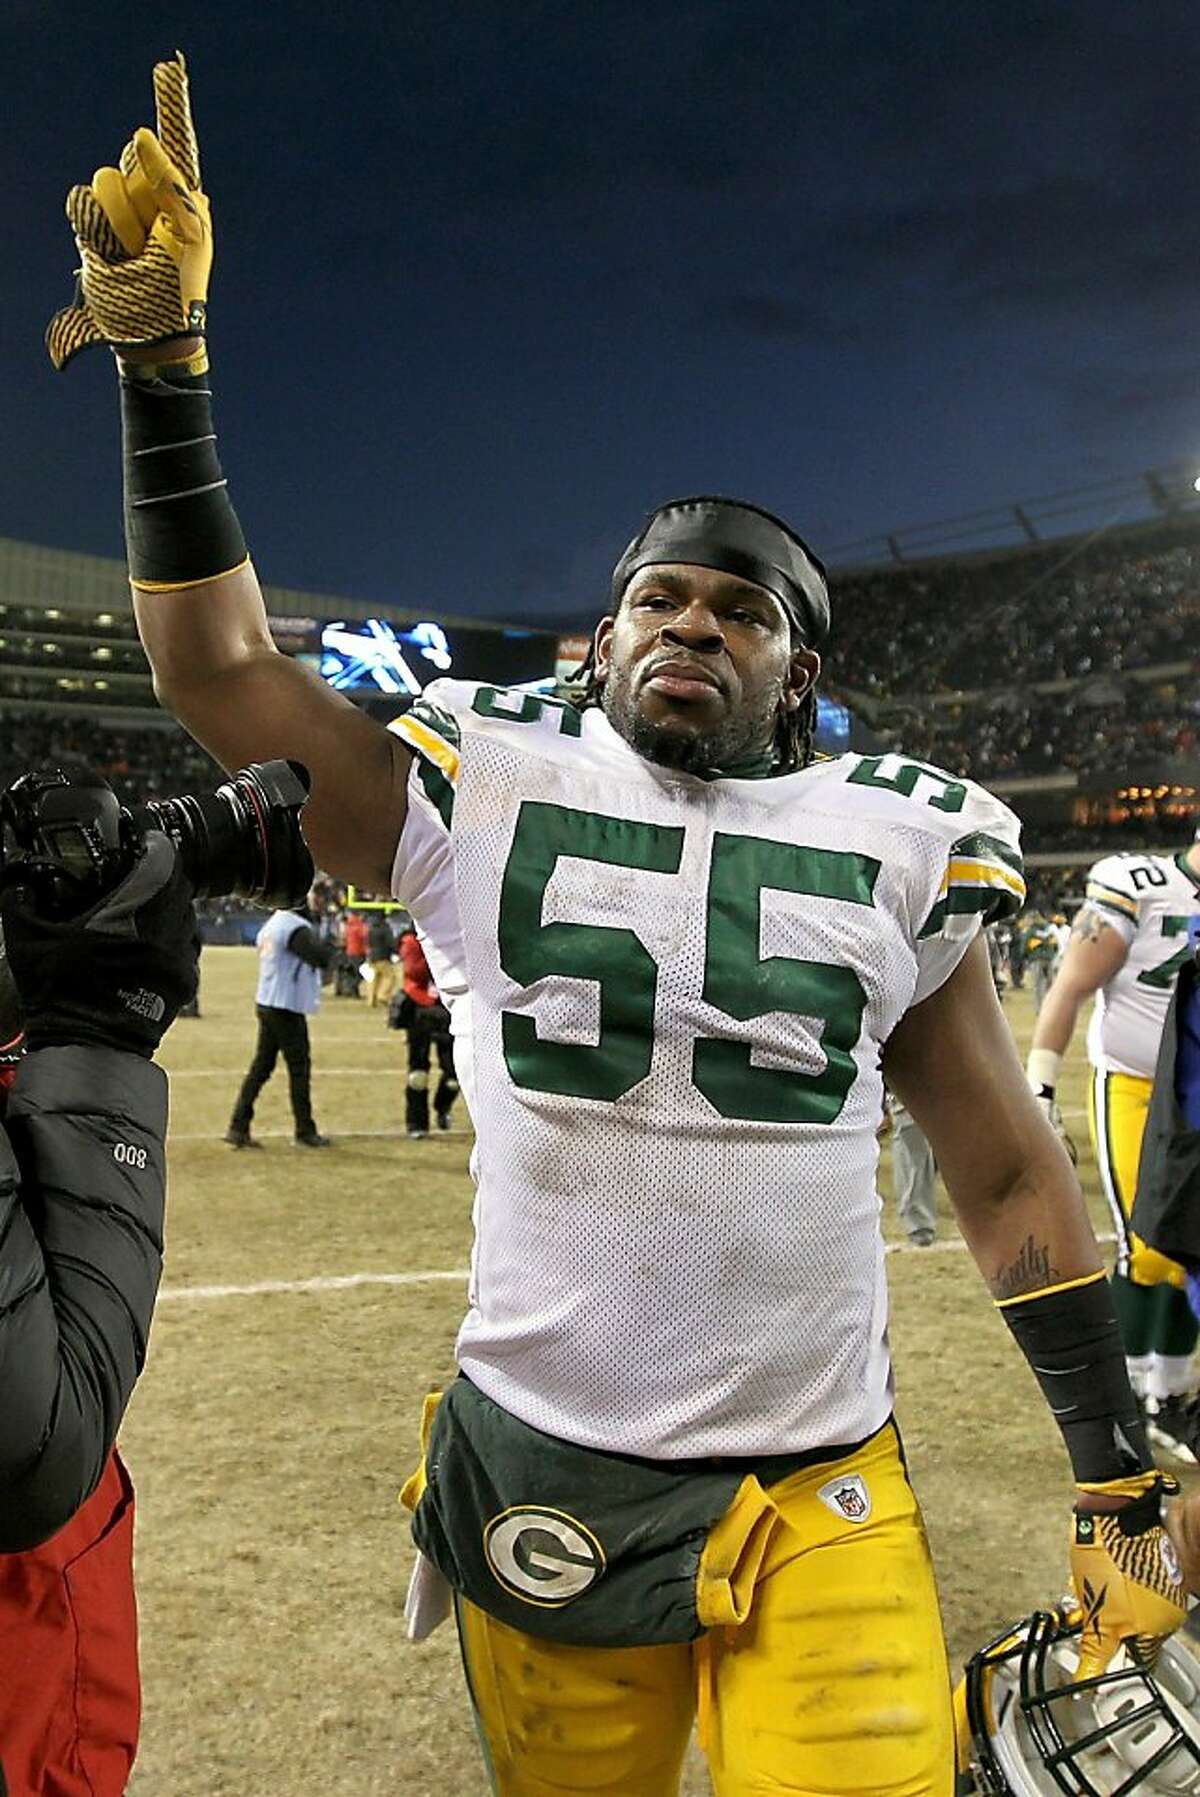 CHICAGO, IL - JANUARY 23: Desmond Bishop #55 of the Green Bay Packers reacts after the Packers 21-14 victory against the Chicago Bears in the NFC Championship Game at Soldier Field on January 23, 2011 in Chicago, Illinois. (Photo by Andy Lyons/Getty Images) Ran on: 02-03-2011 Desmond Bishop proclaims the Packers superiority after defeating the Bears 21-14 in the NFC Championship Game.